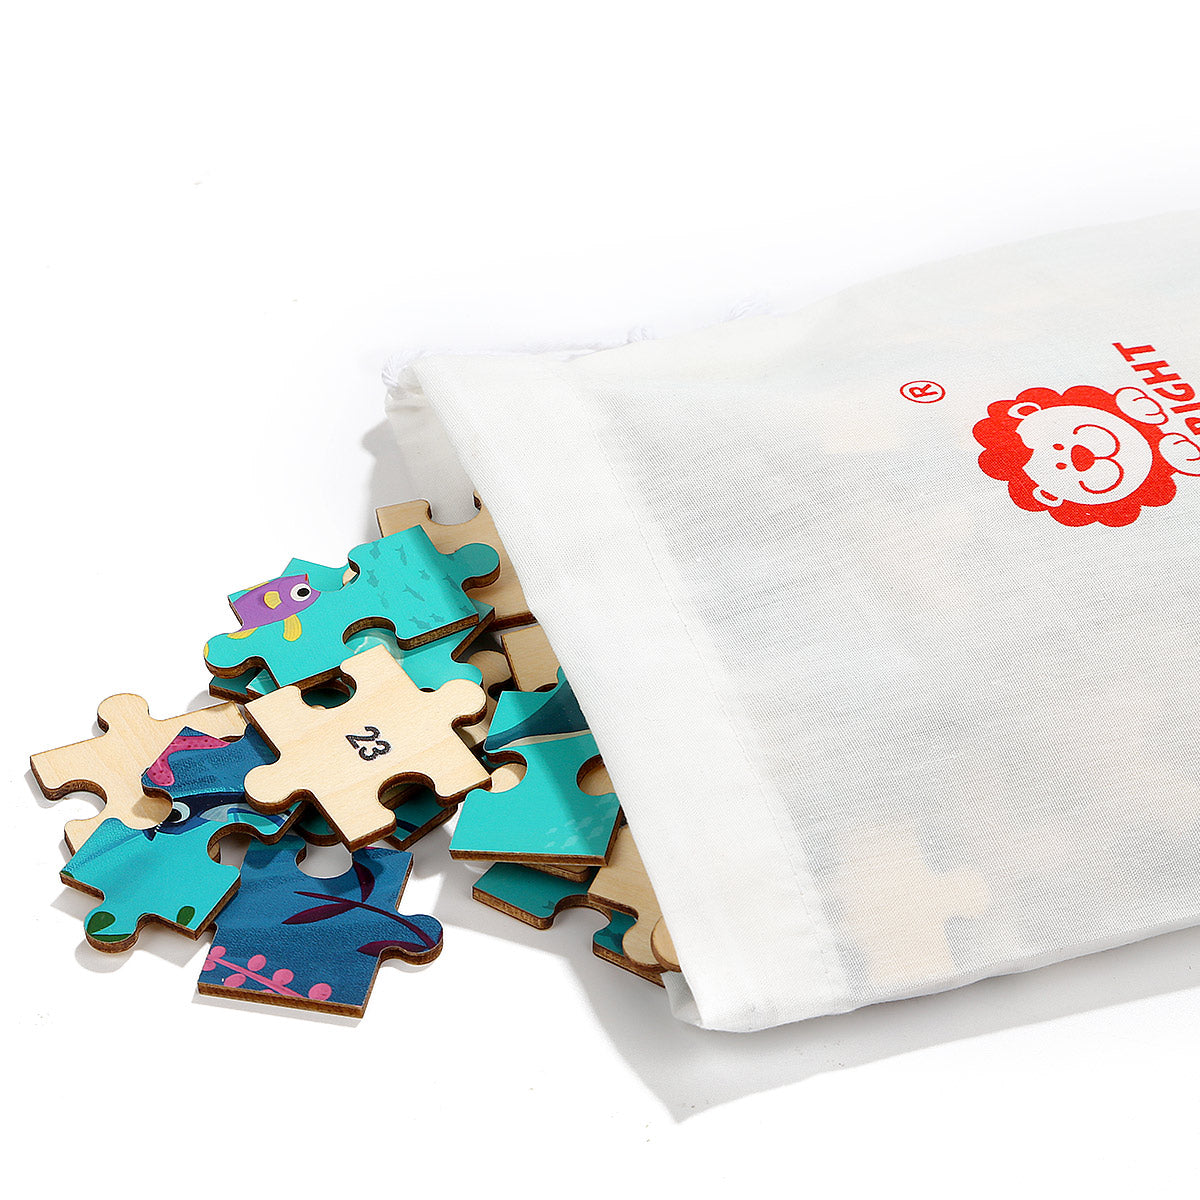 After playing, the wooden puzzle pieces are safely stored in our transport bag to make sure nothing gets lost.